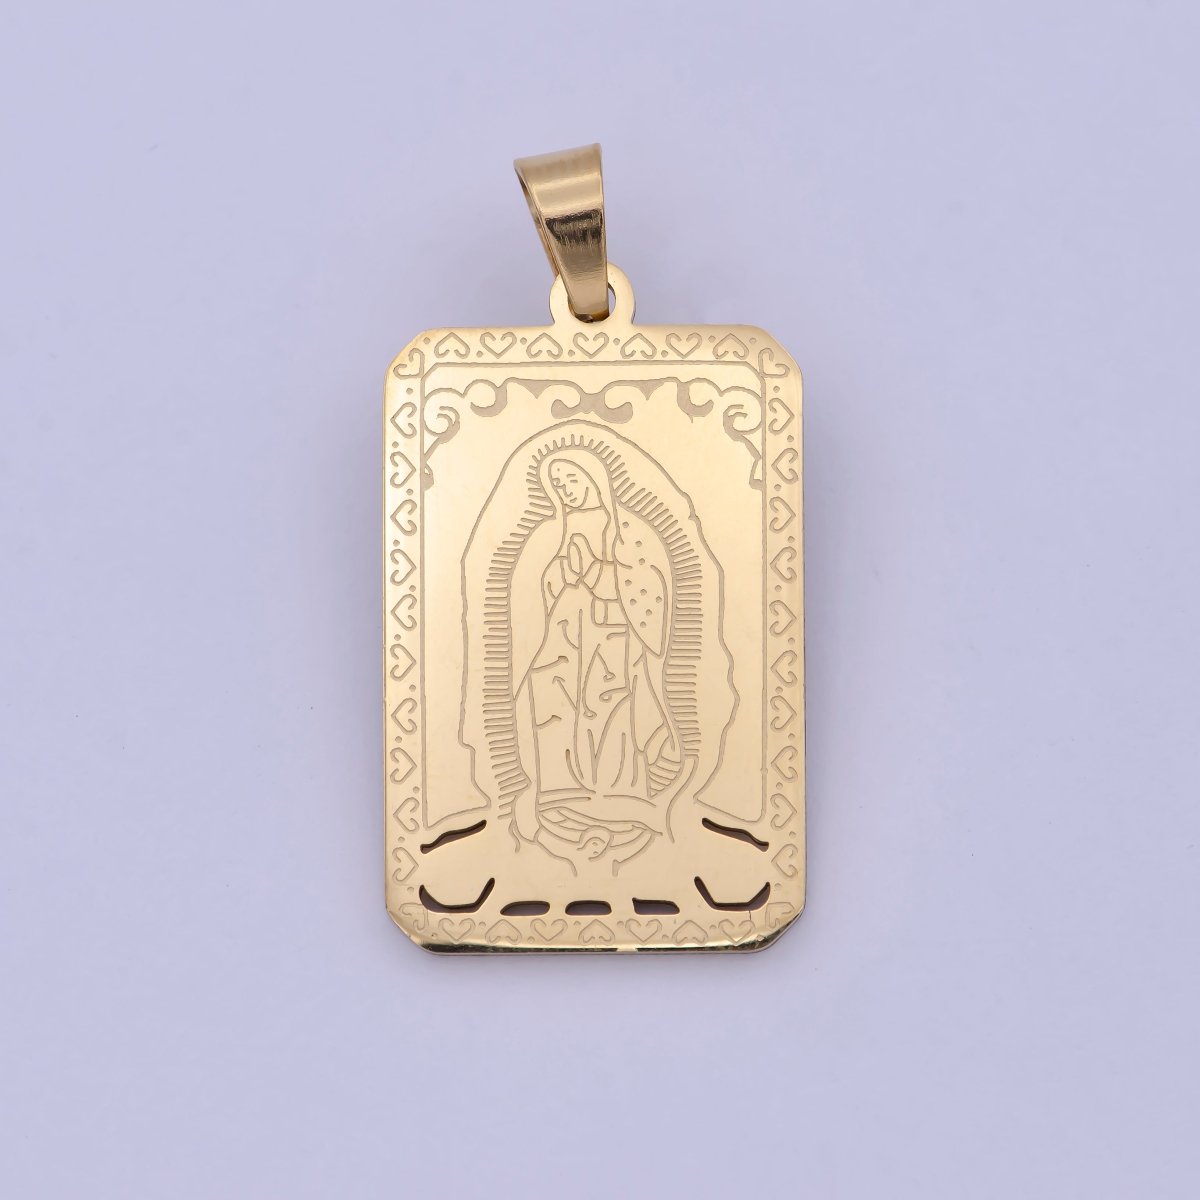 Gold Tag Virgin Mary Charm for Necklace Lady of Guadalupe Pendant for Religious Jewelry Making Supply in Gold Filled J-313 - DLUXCA